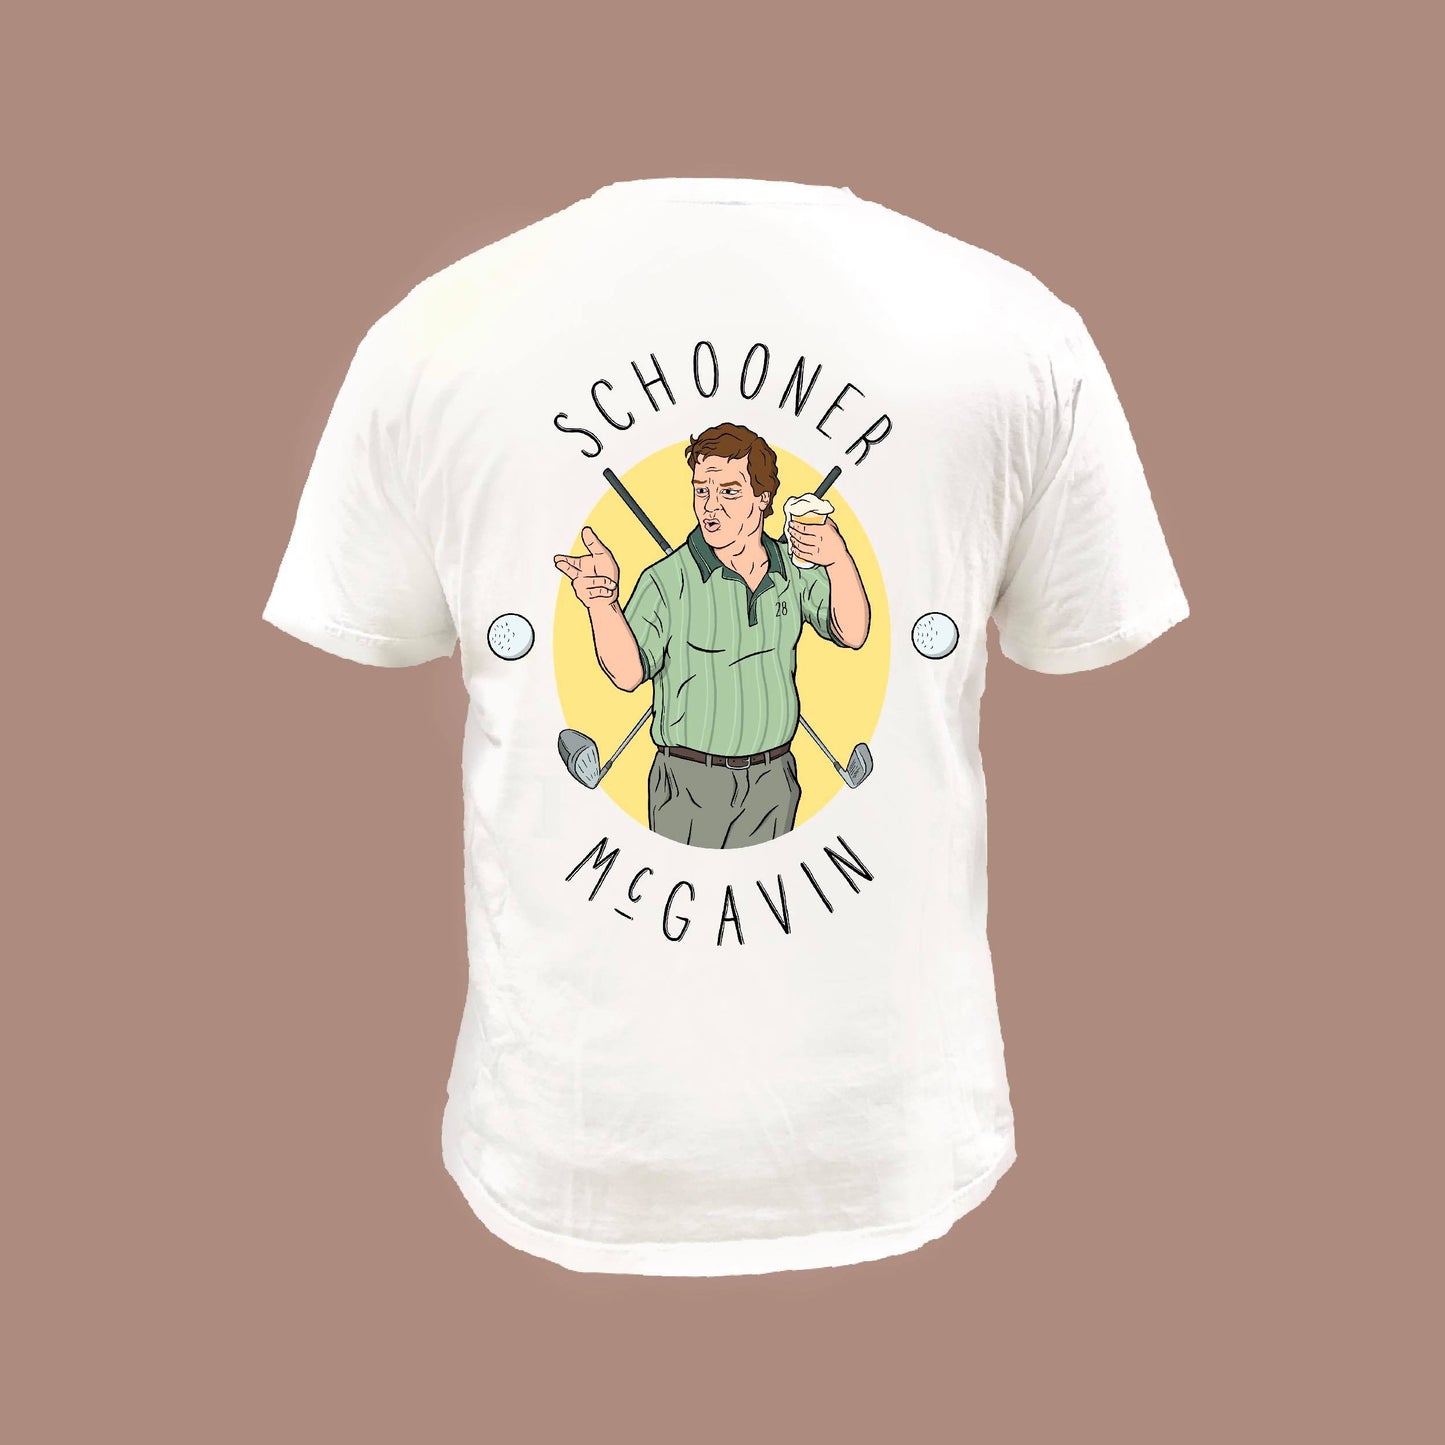 Schooner McGavin Tee -WHITE FRONT AND BACK